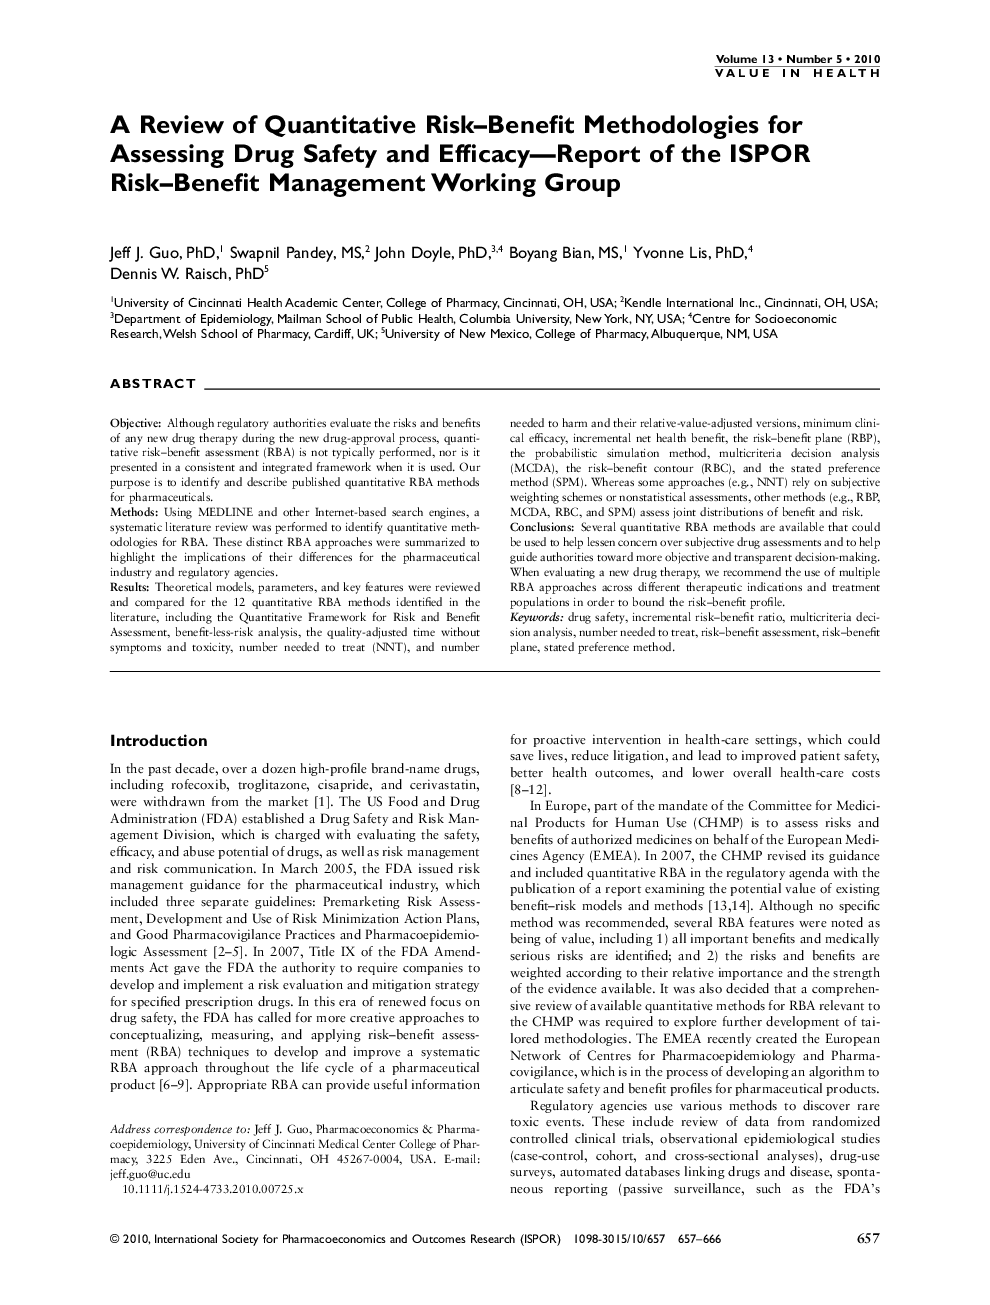 A Review of Quantitative Risk–Benefit Methodologies for Assessing Drug Safety and Efficacy—Report of the ISPOR Risk–Benefit Management Working Group